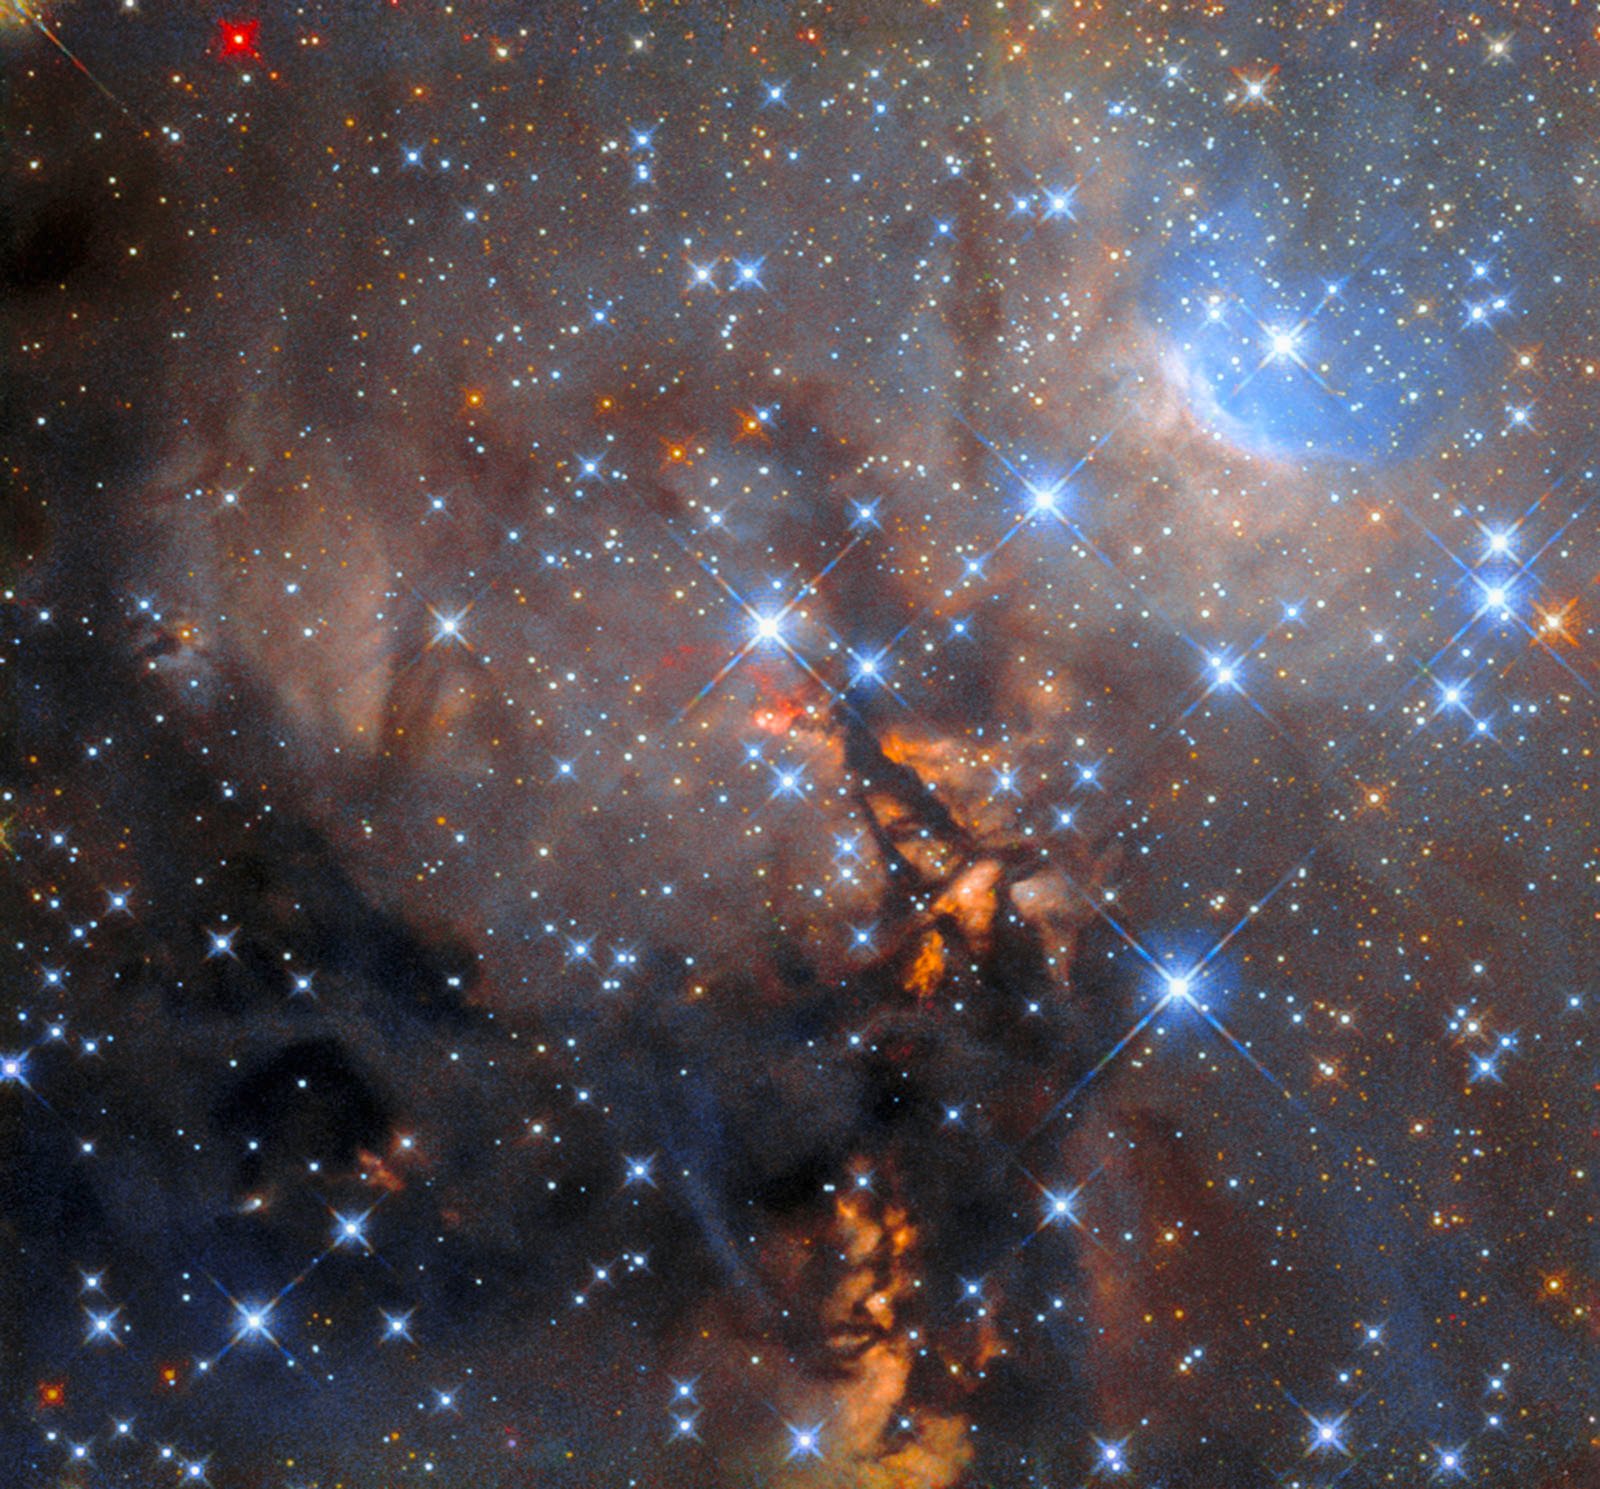 The field is filled with hundreds of bright stars. They are primarily blue, with scattered smaller stars visible in yellow/orange. The background is dominated by cloudy grey dust, with permeating regions of dark black and orange.